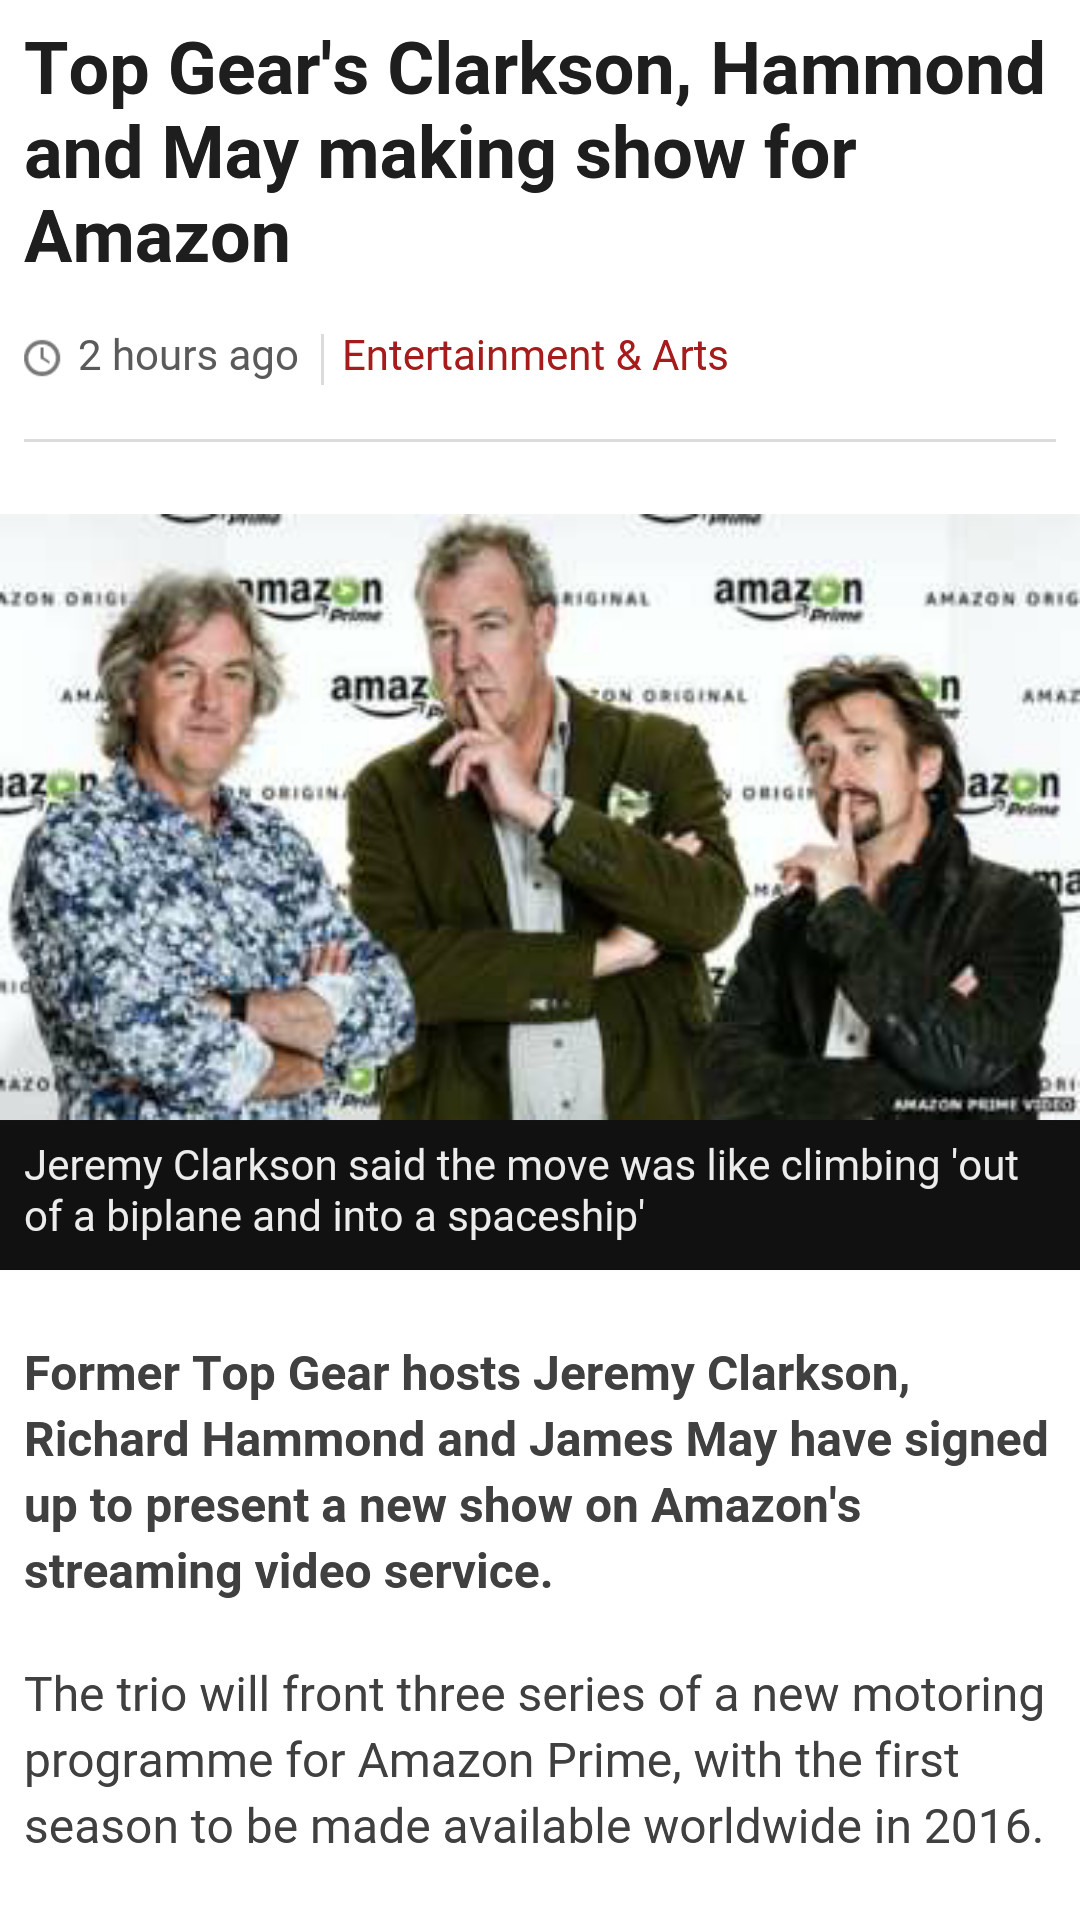 Wonder what they are going to do. Hopefully its similar to top gear - meme